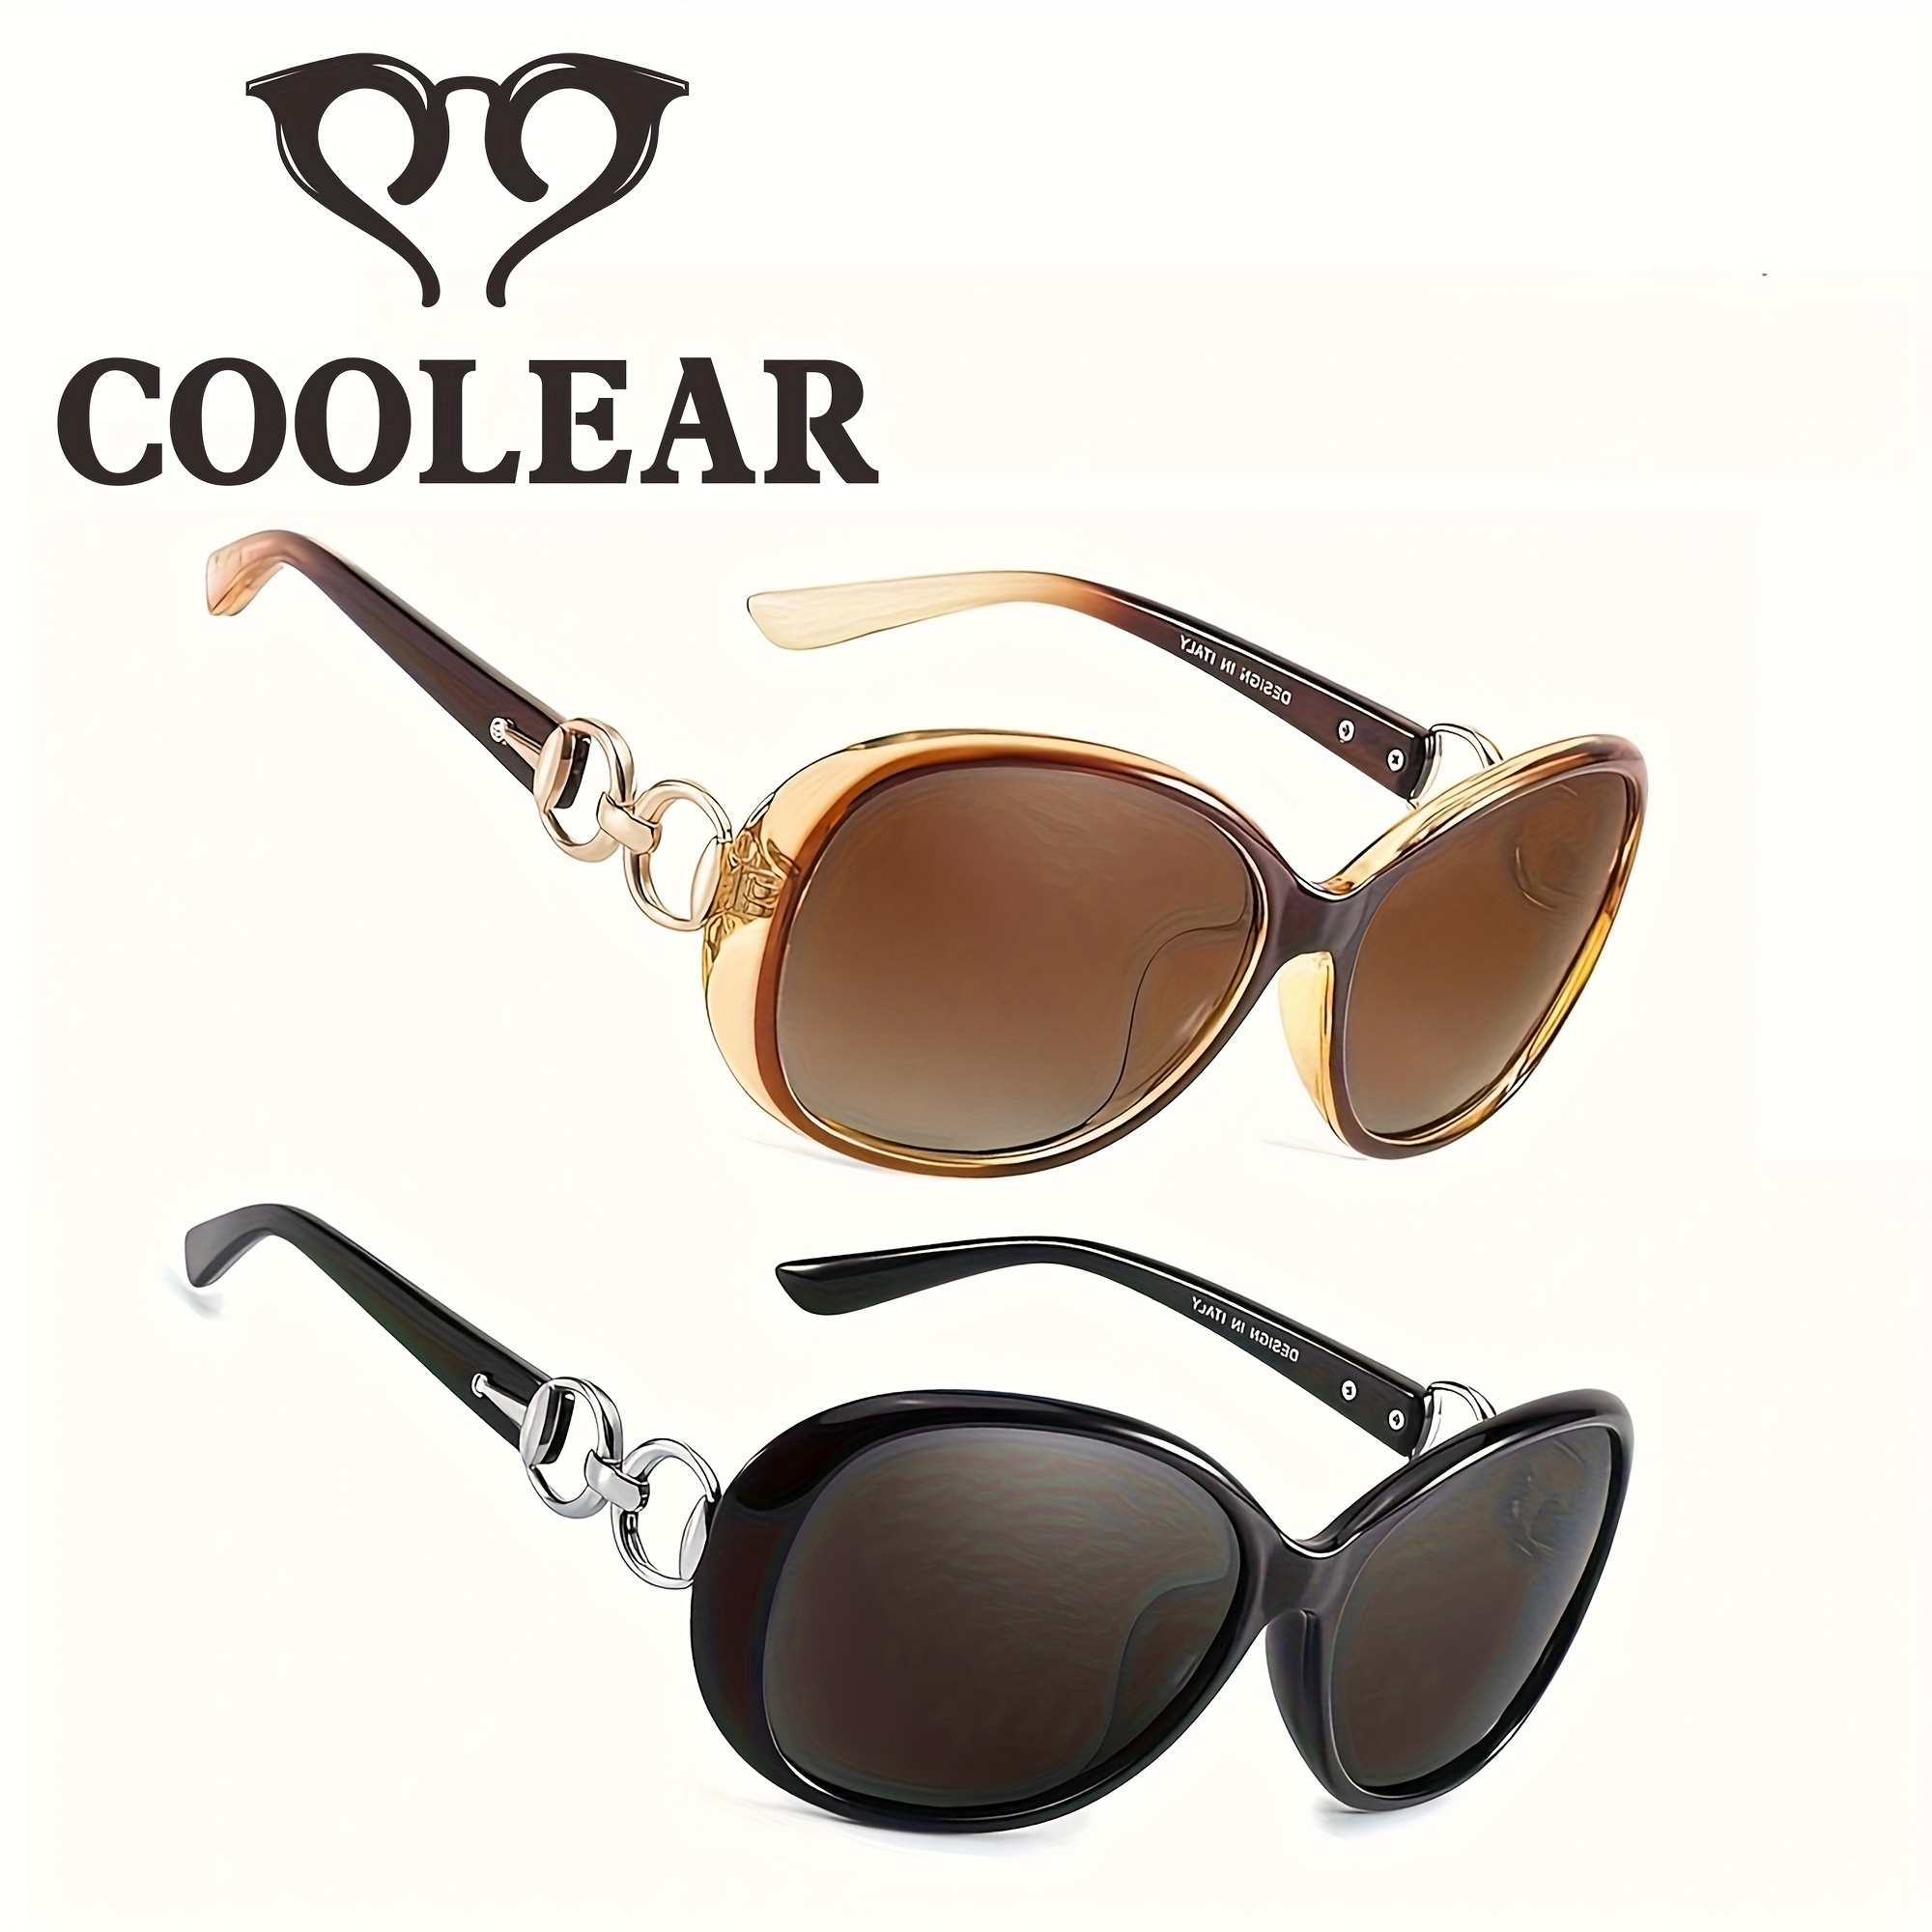 

Coolear 2 Pack Polarized Sunglasses For Women Retro Stylish O Sunglasses Uv400 Protection For Outdoors